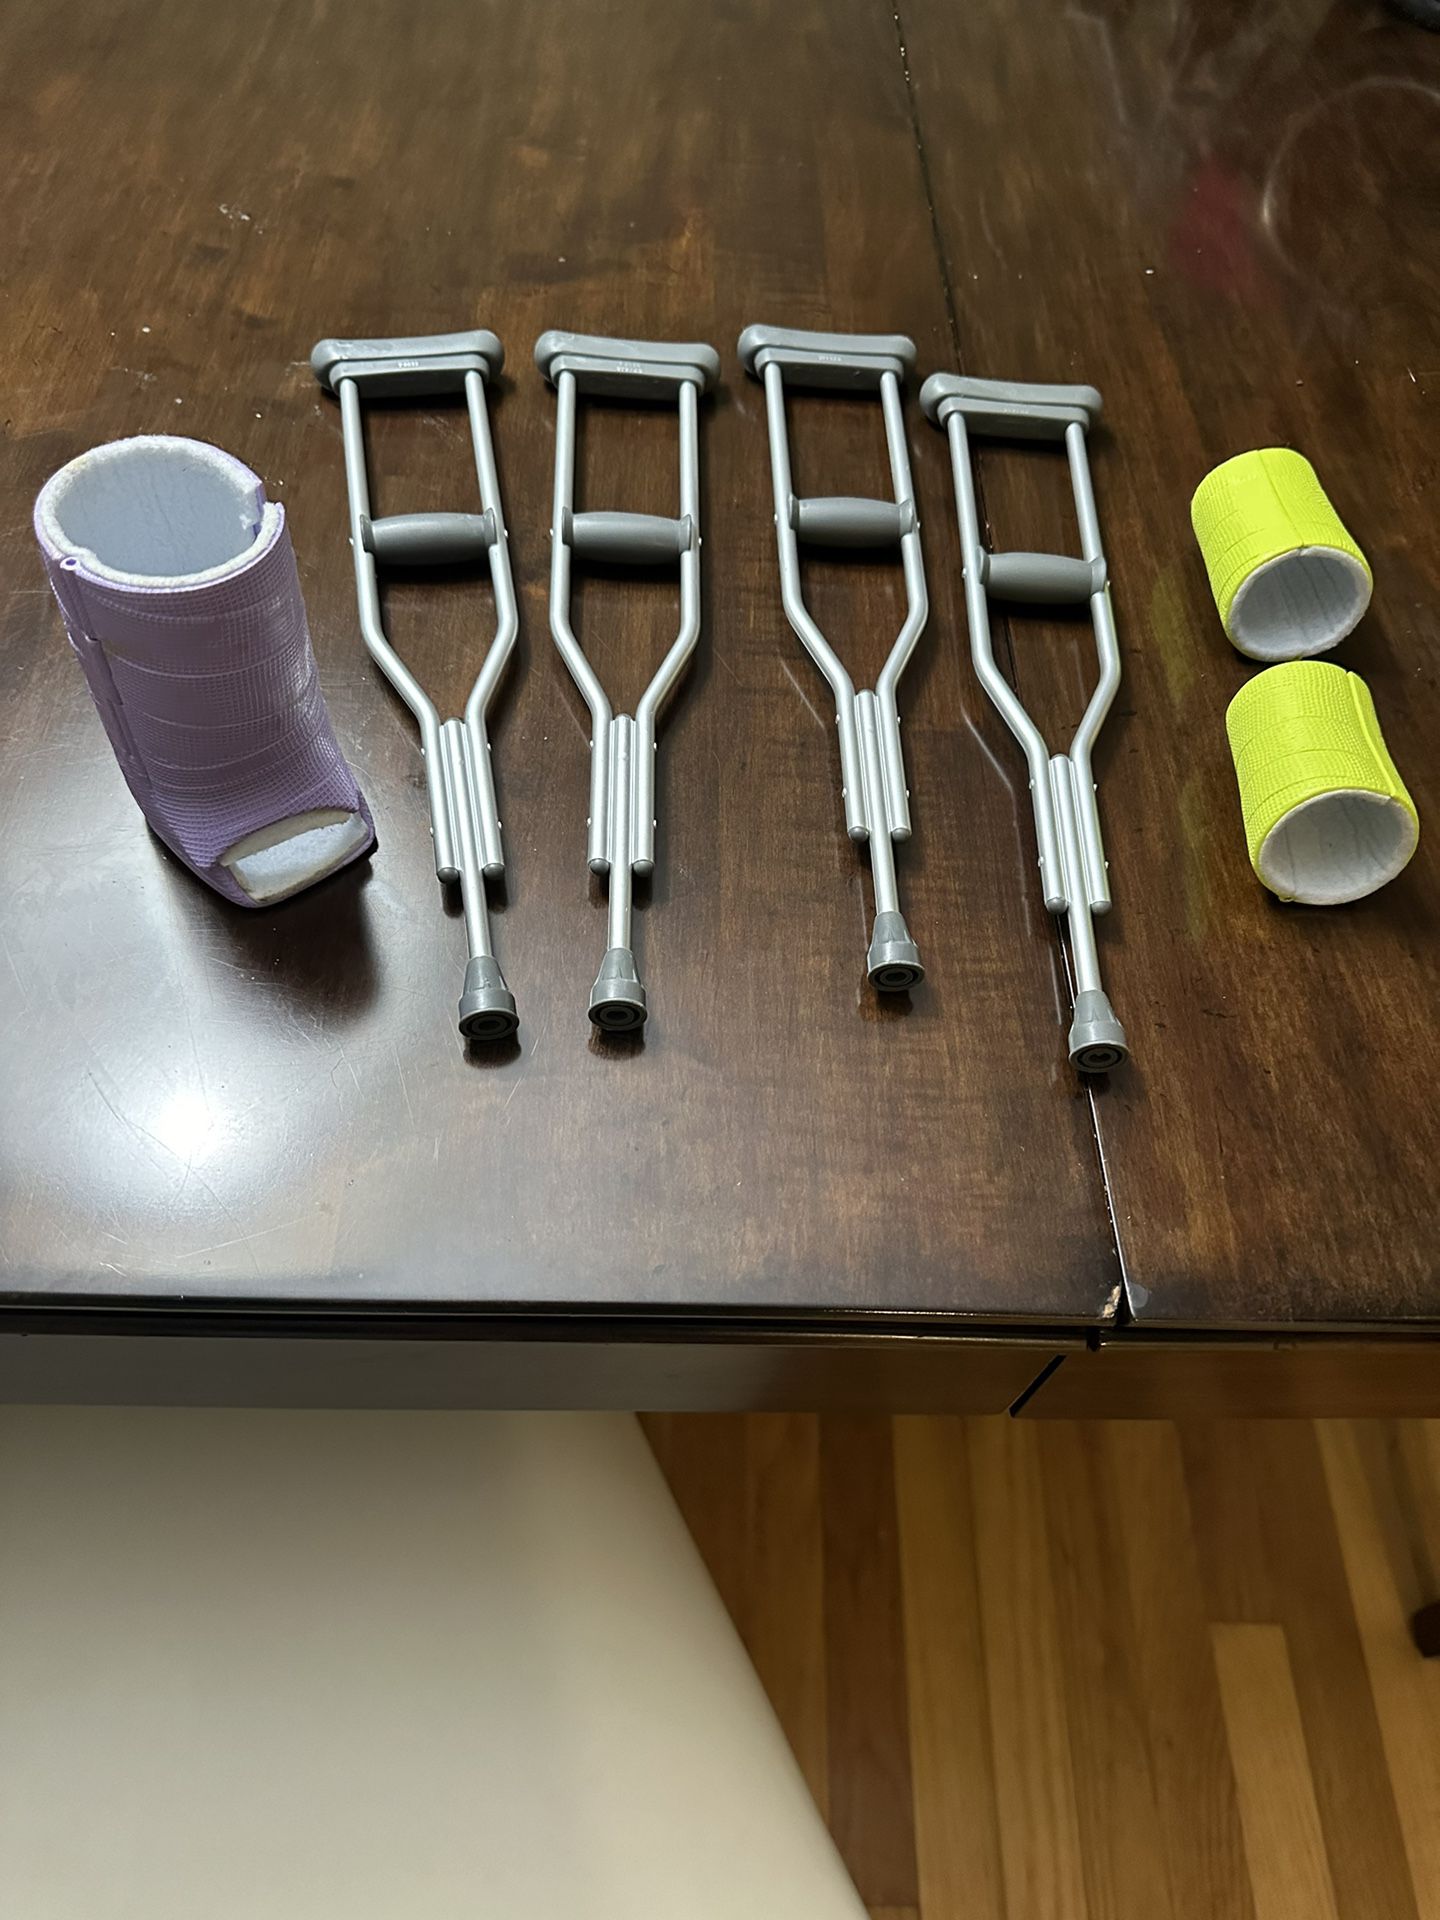 American Girl 2 Crutch Sets and Casts